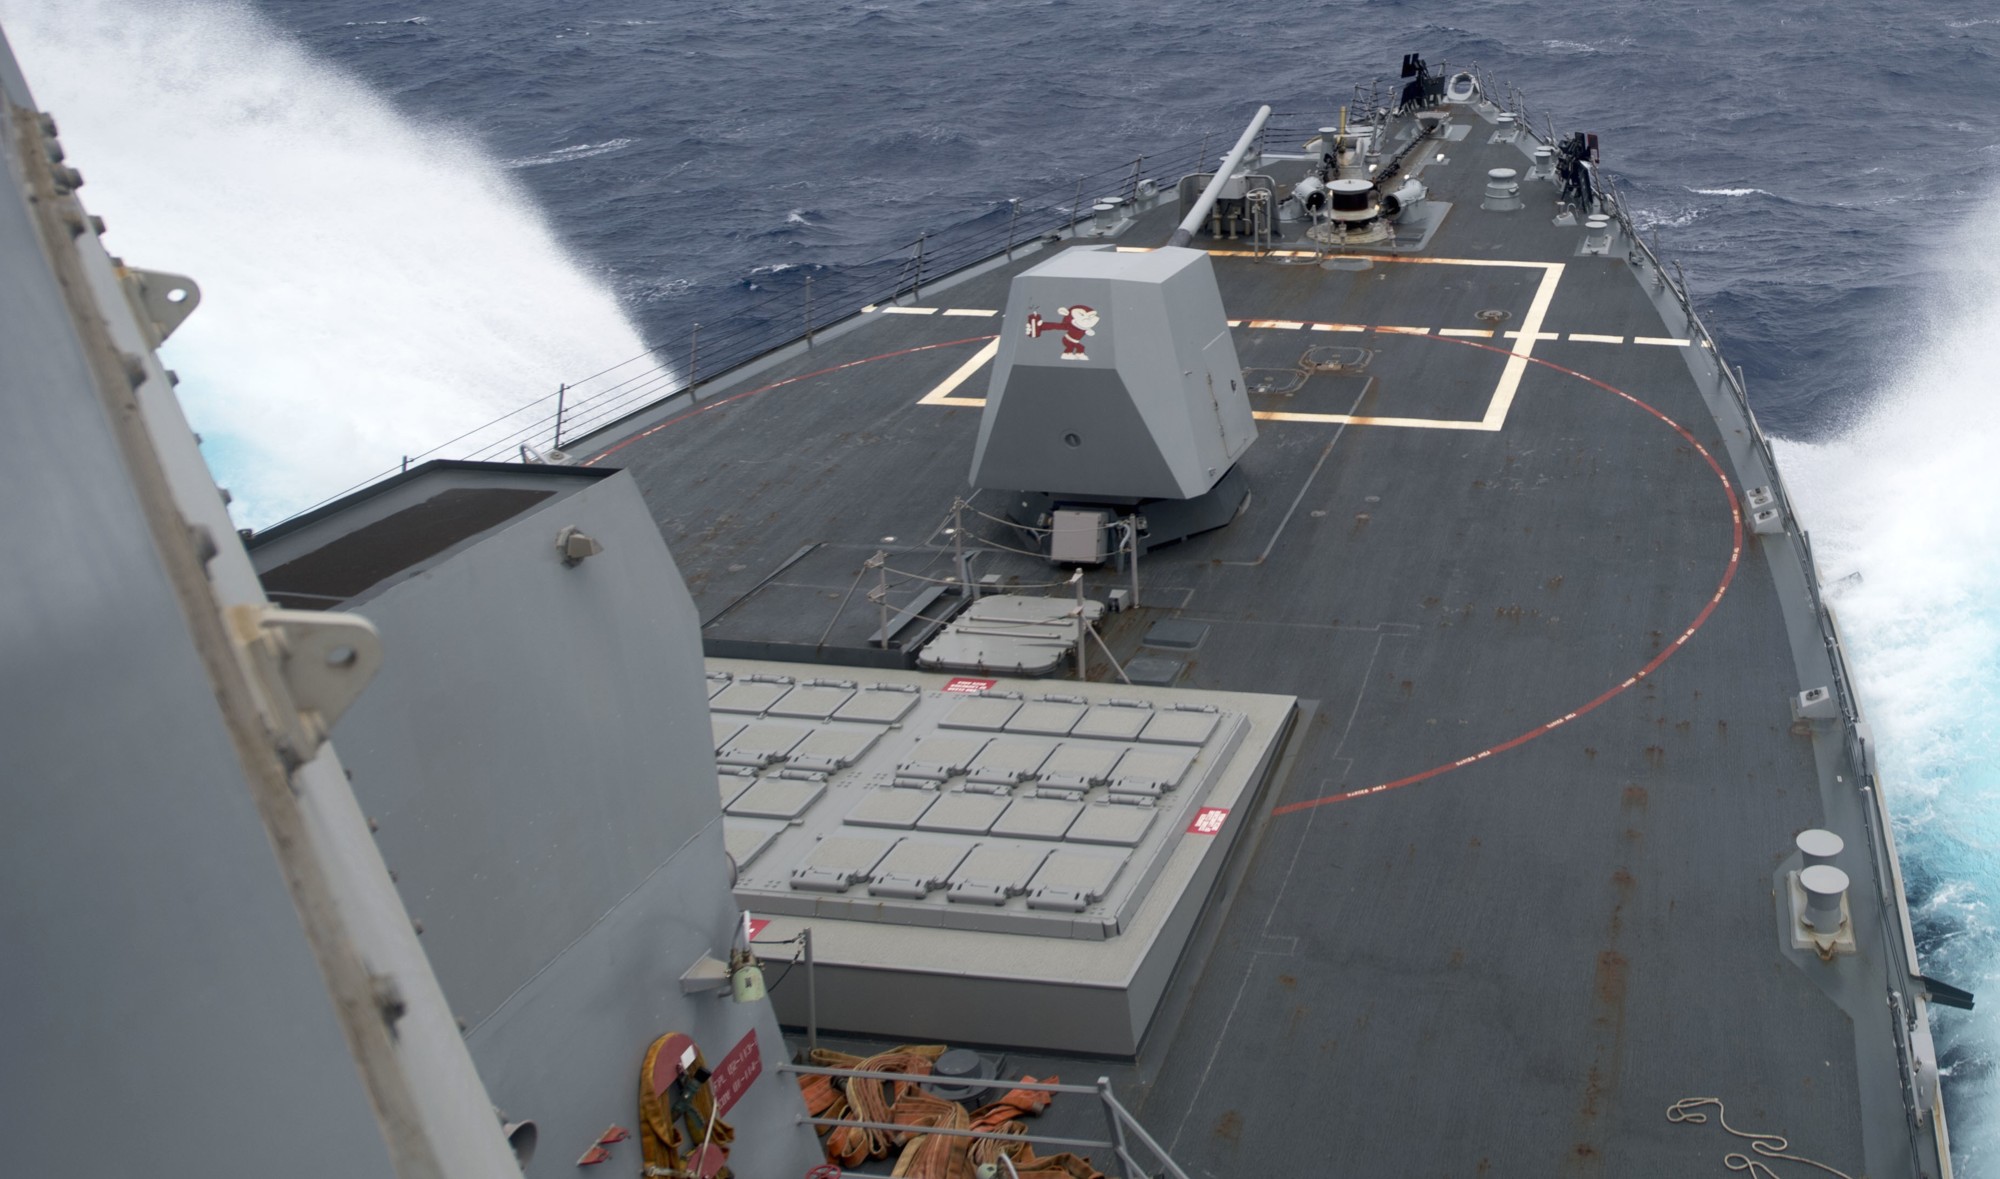 ddg-112 uss michael murphy arleigh burke class guided missile destroyer aegis us navy 31